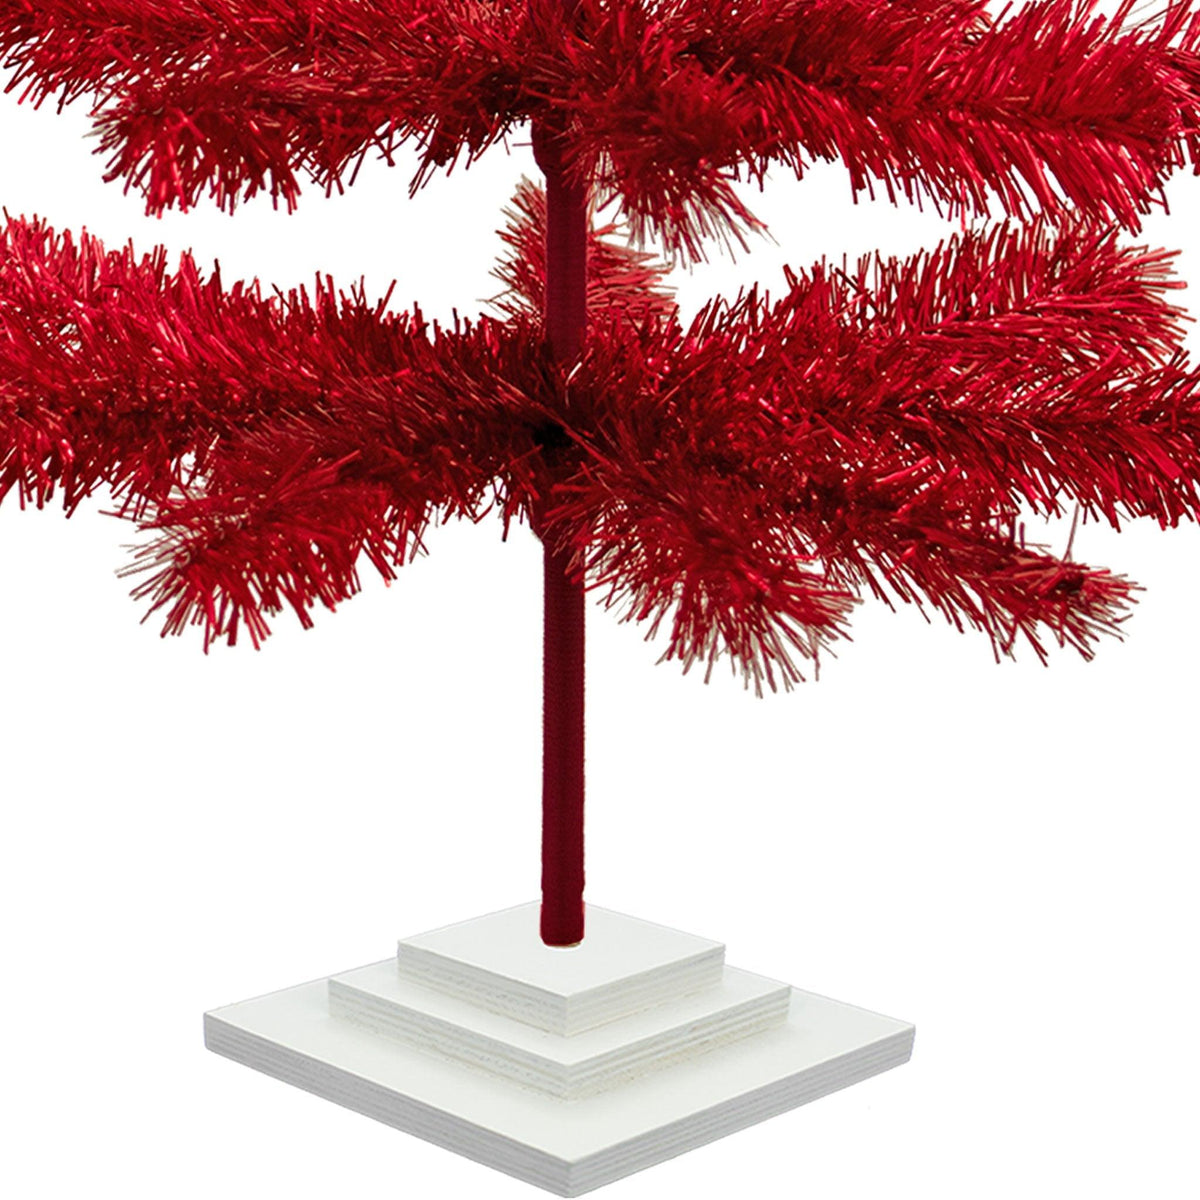 36in Red trees comes with a 3-tiered white wood stand that is easy to detach and secures the trees upright